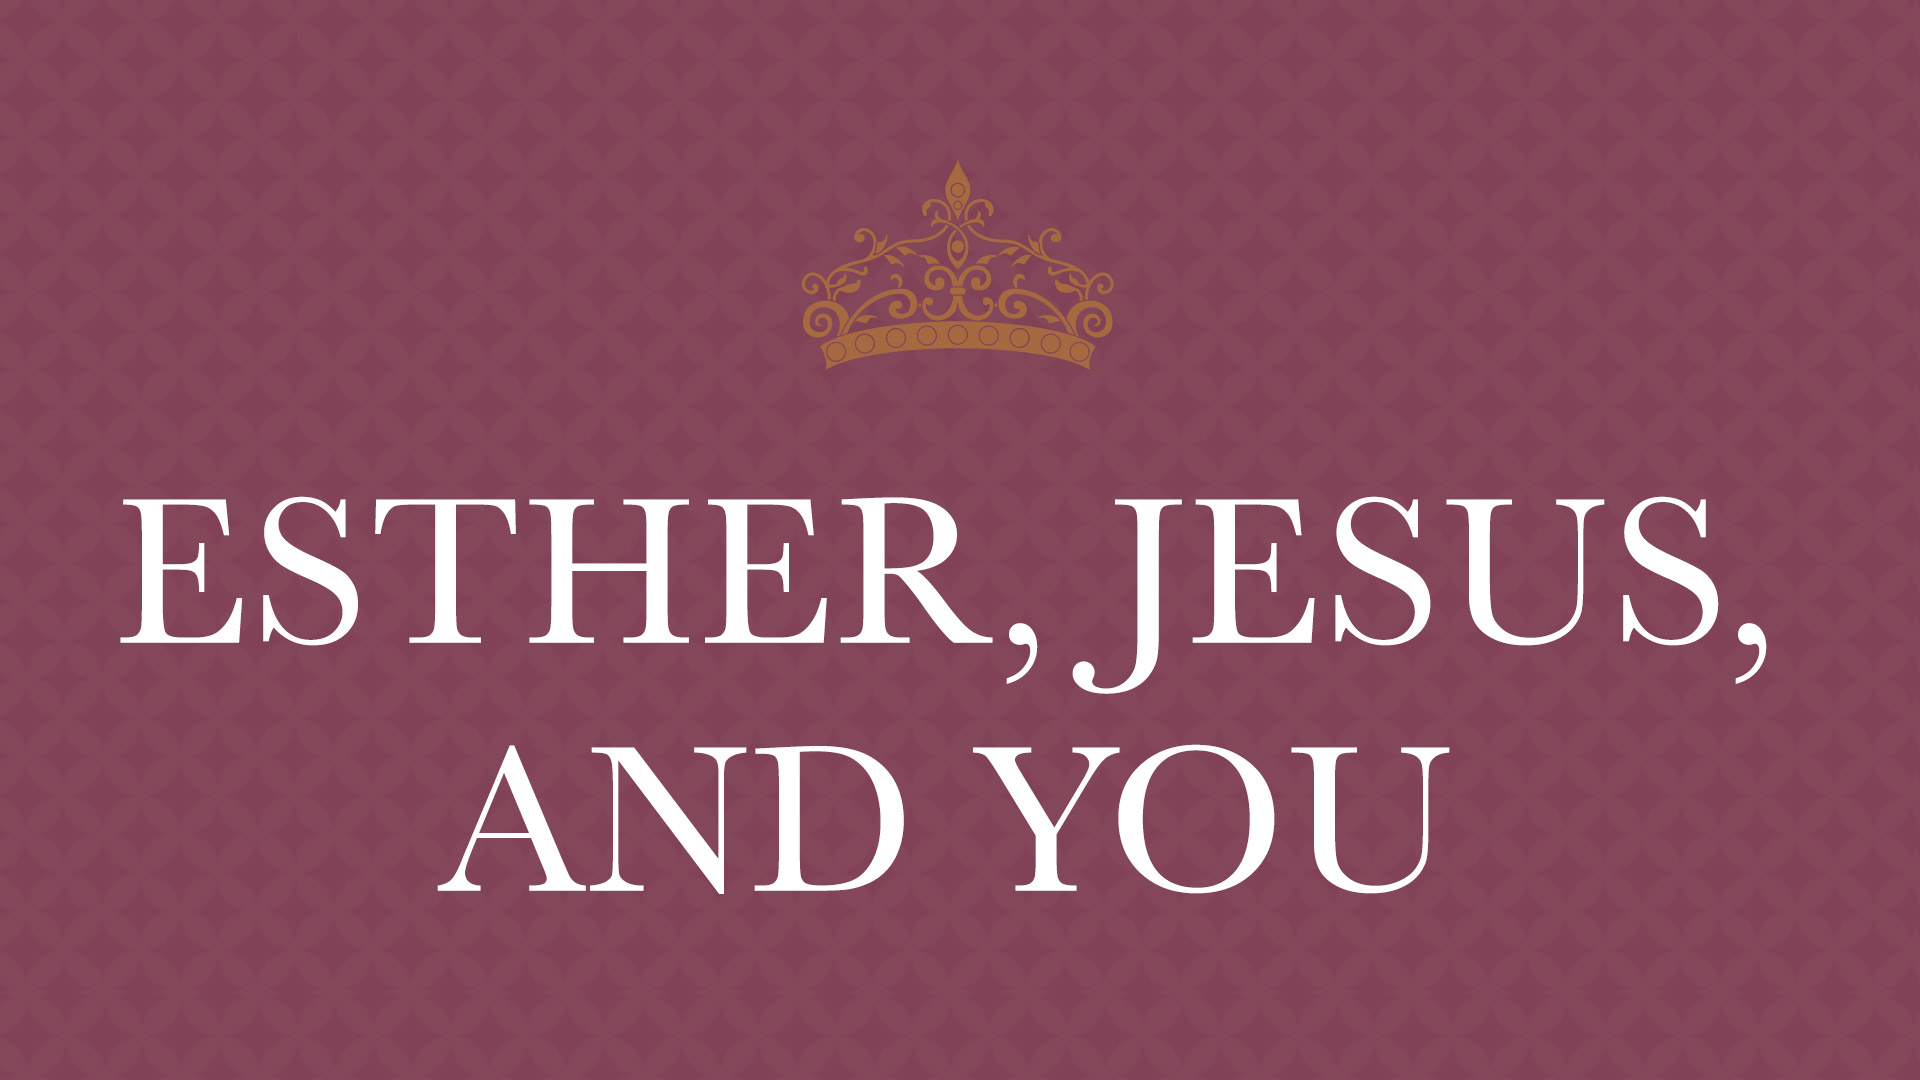 Jesus, Esther, and You